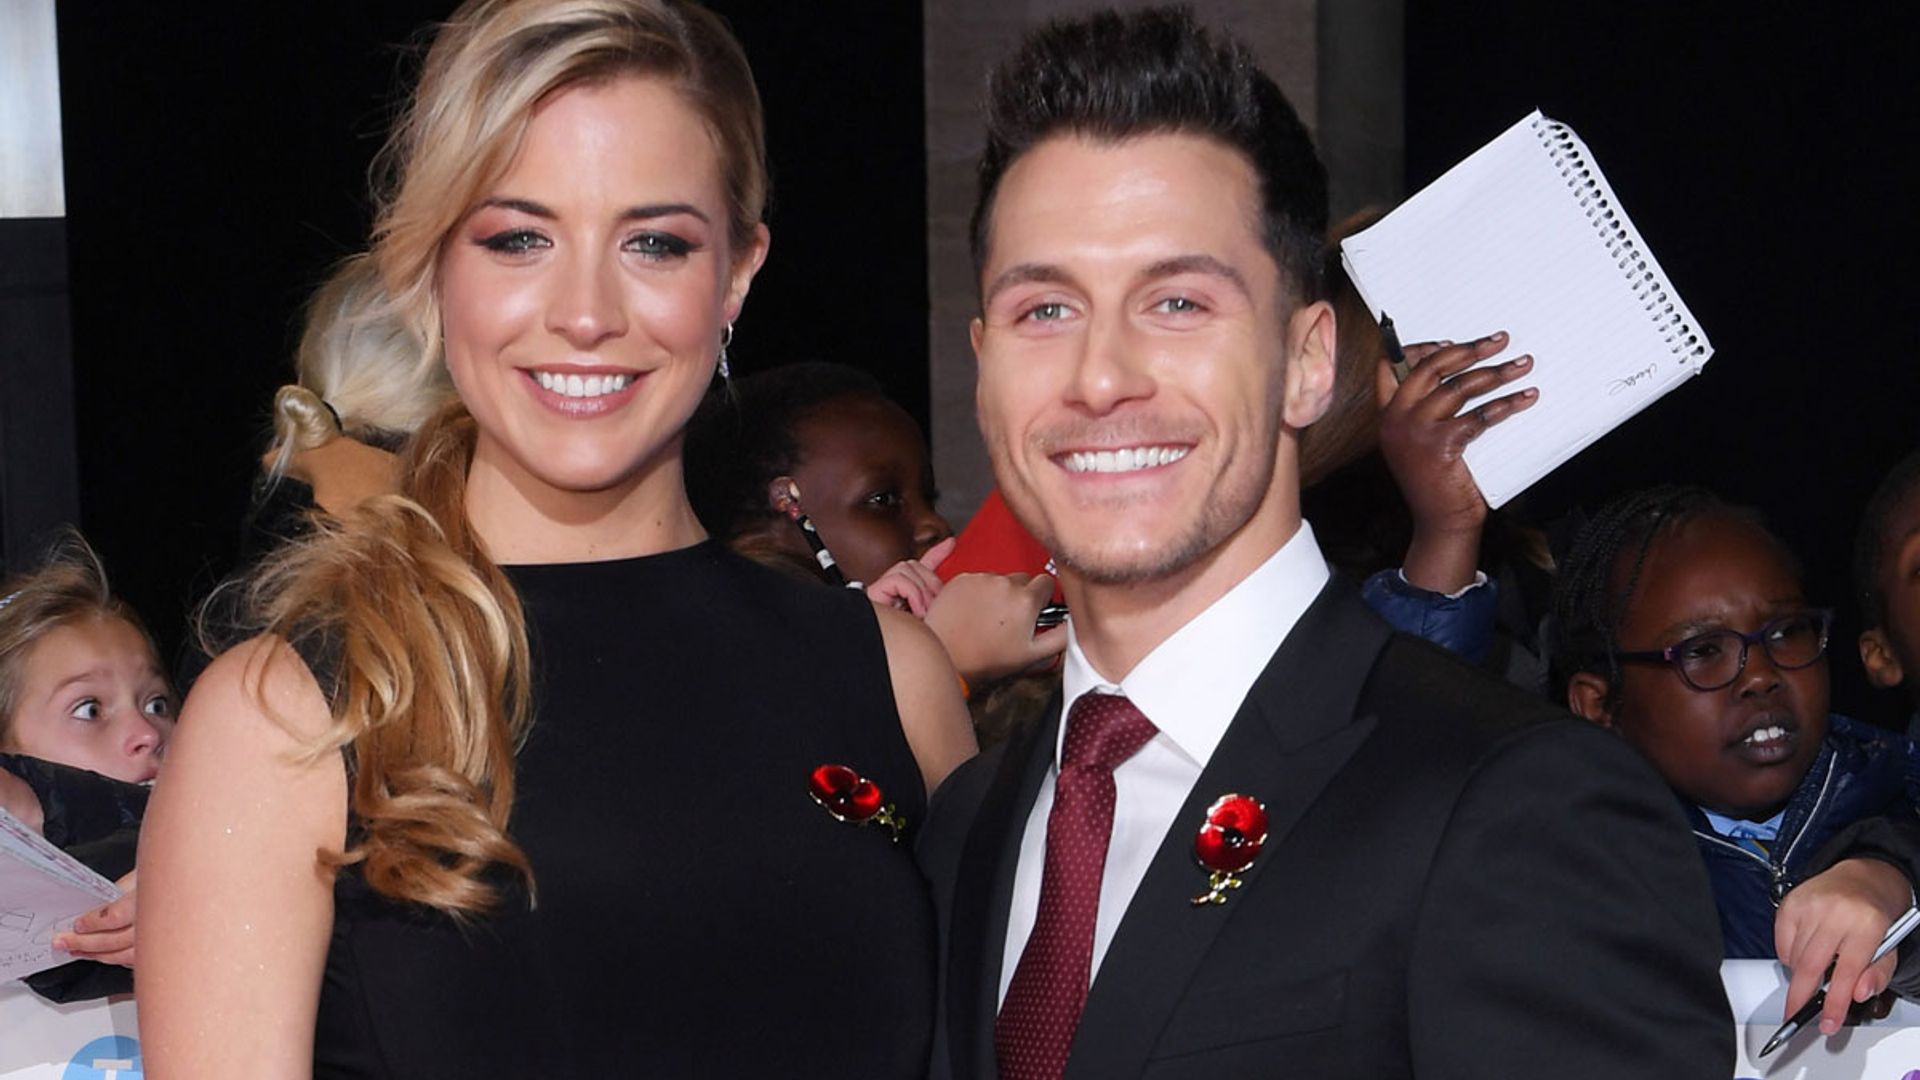 Celebrity shock: Gorka Marquez and Gemma Atkinson's bedding is from ...